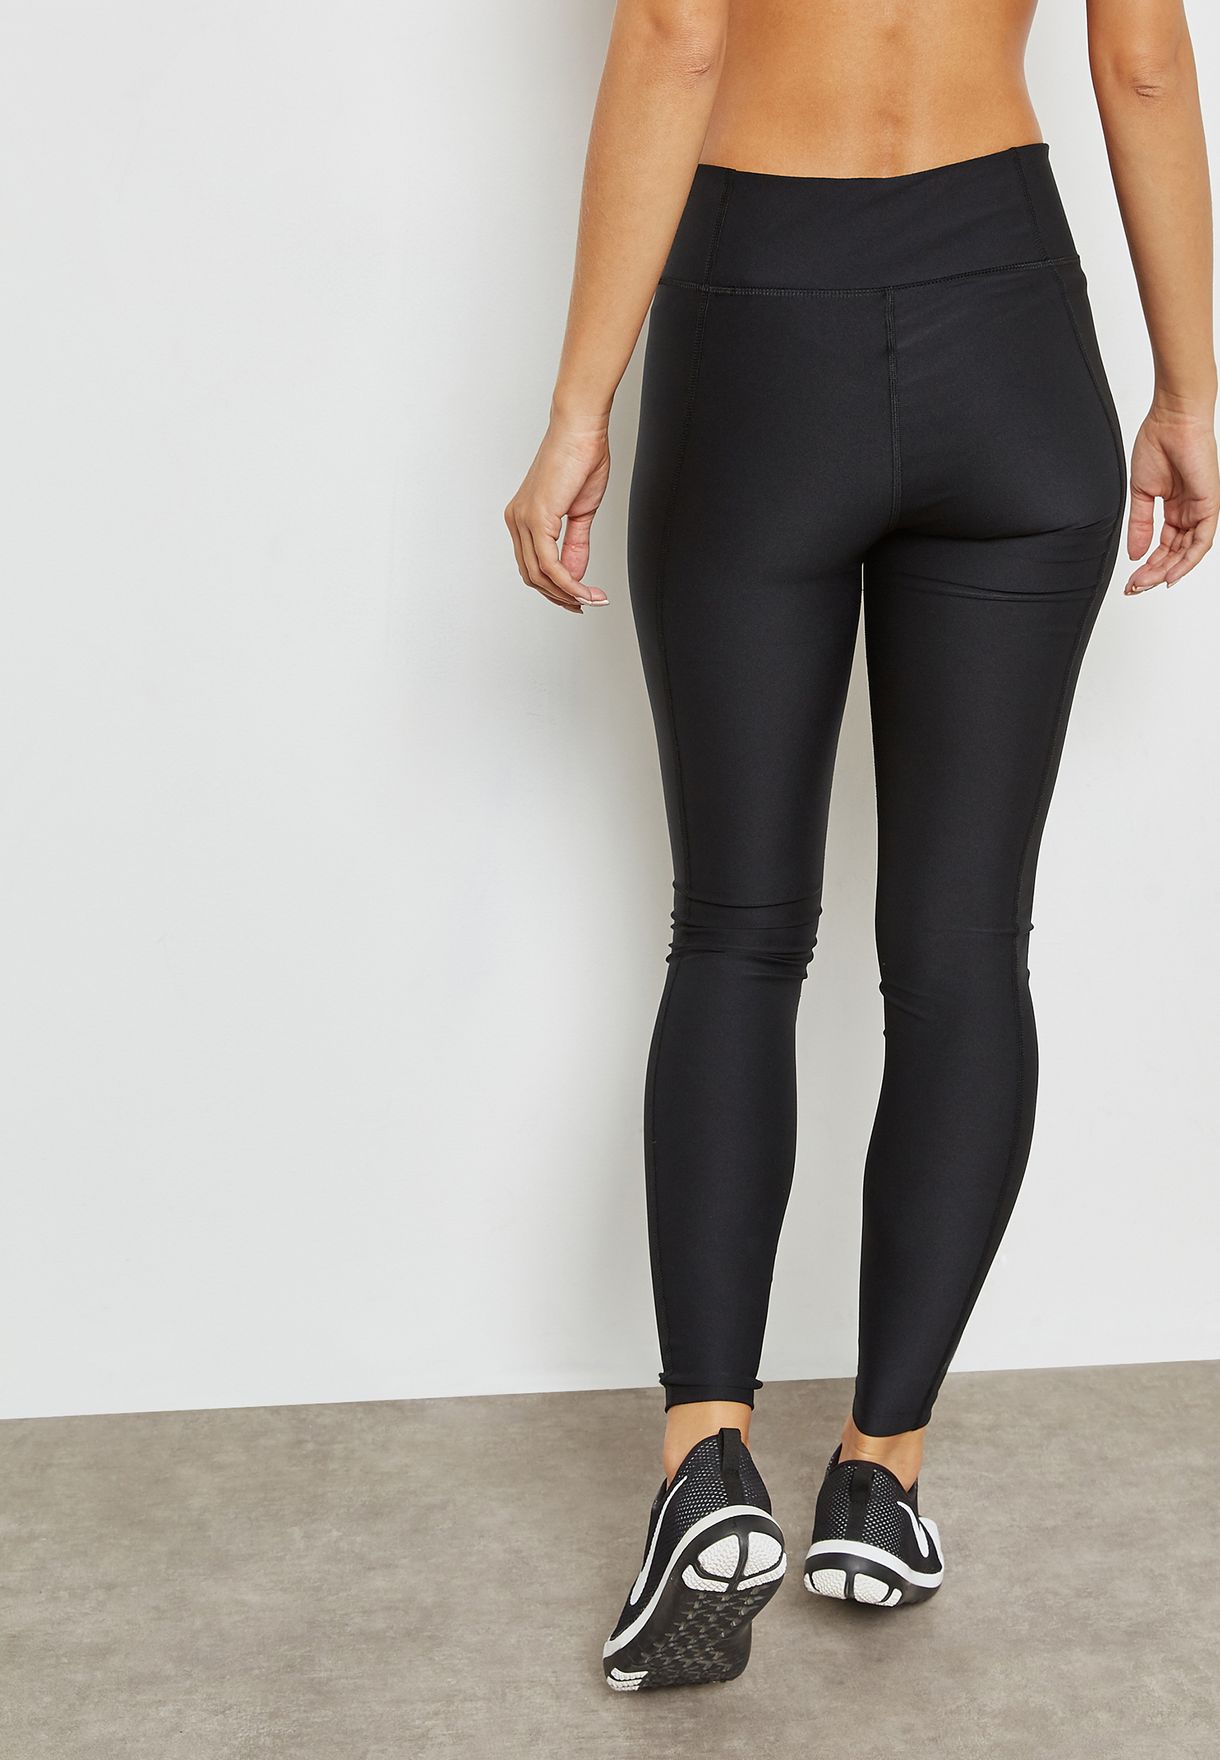 Buy Nike black Power Victory Tights for 